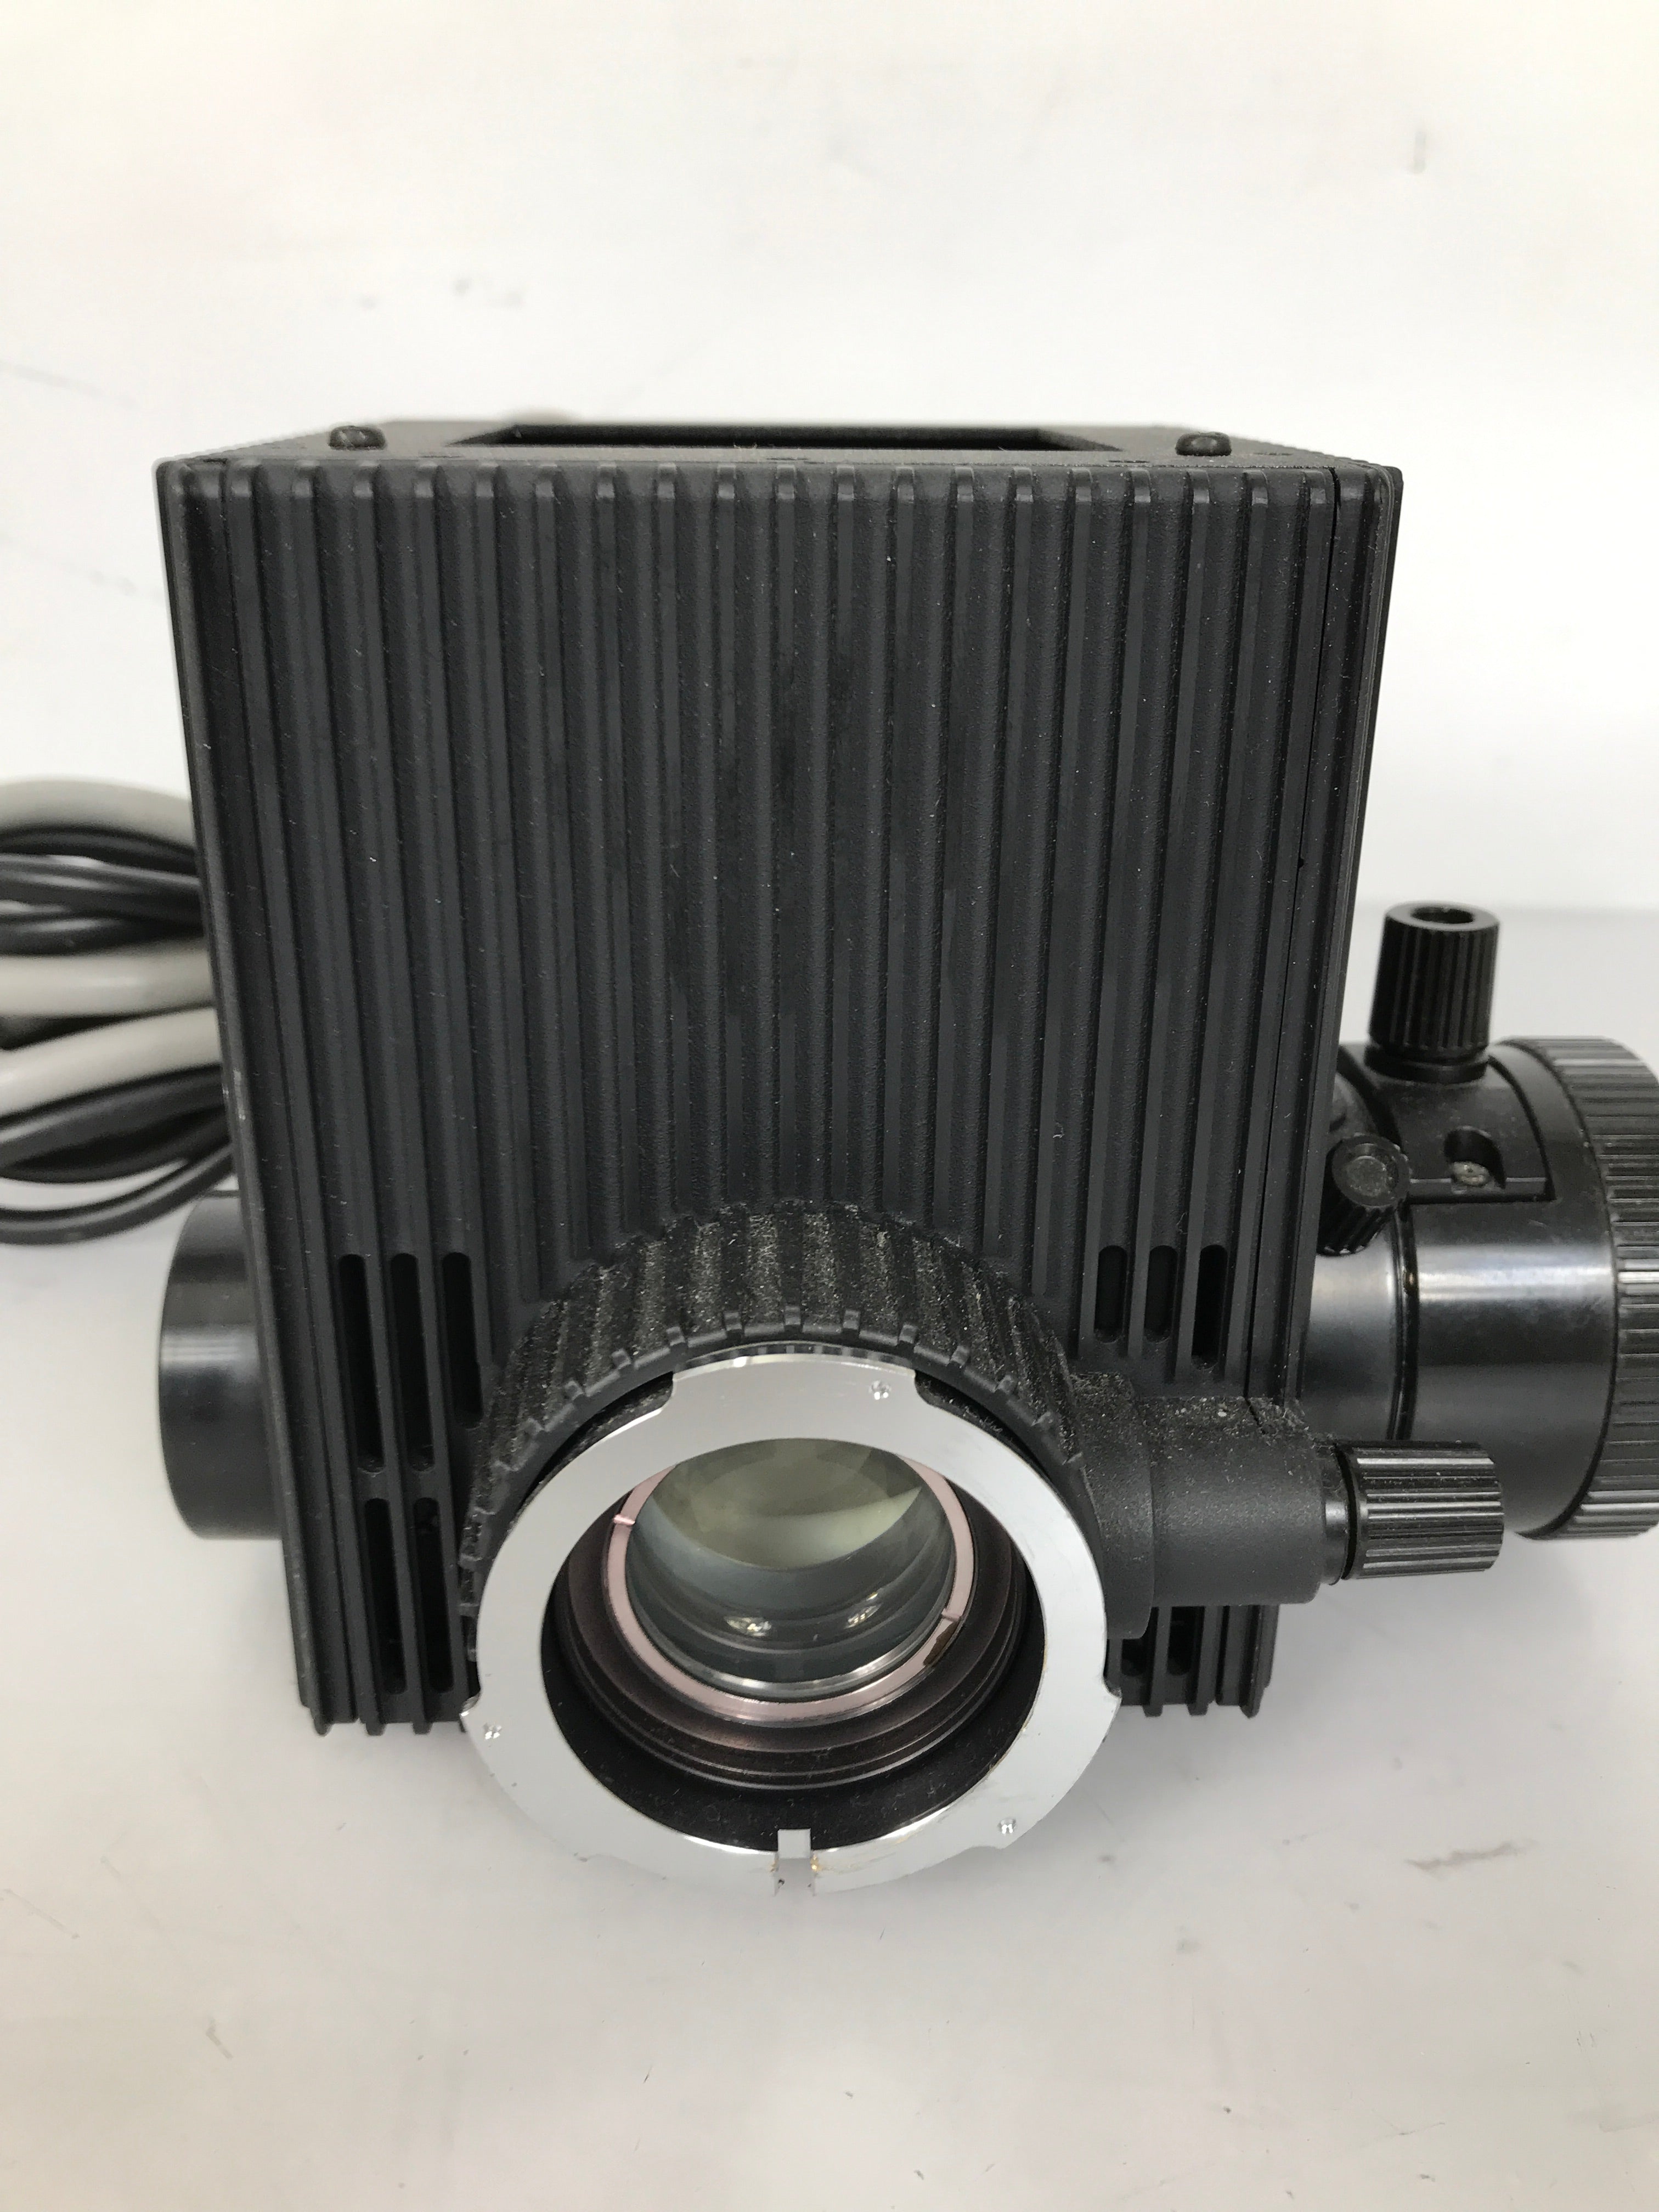 Nikon Hg 100W Lamp House for Diaphot Microscope *For Parts or Repair*